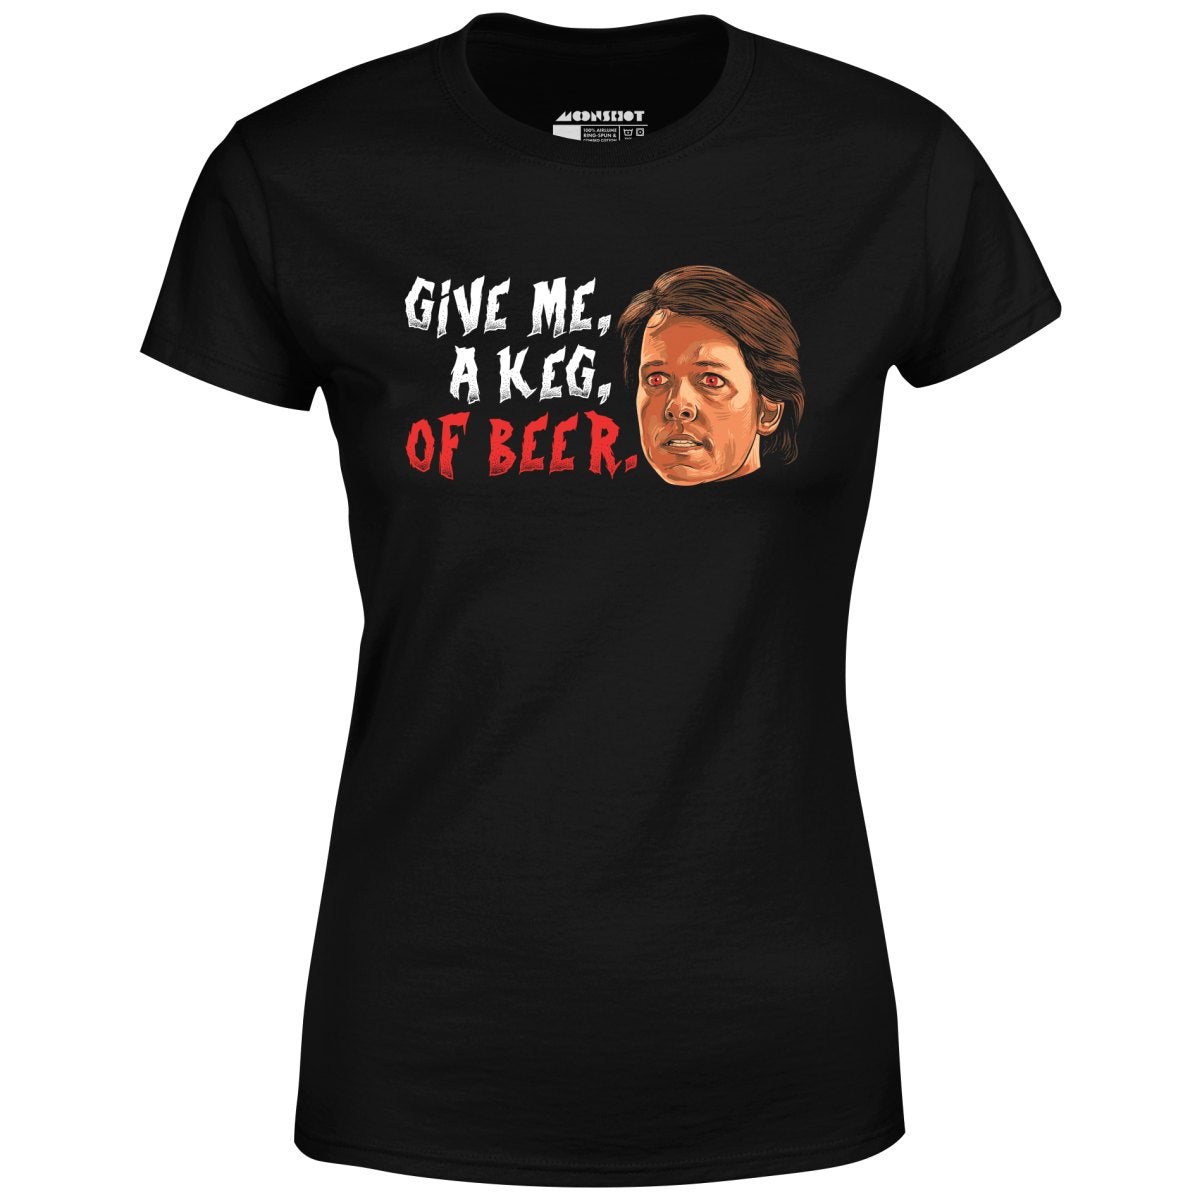 Give Me, a Keg, of Beer - Women's T-Shirt